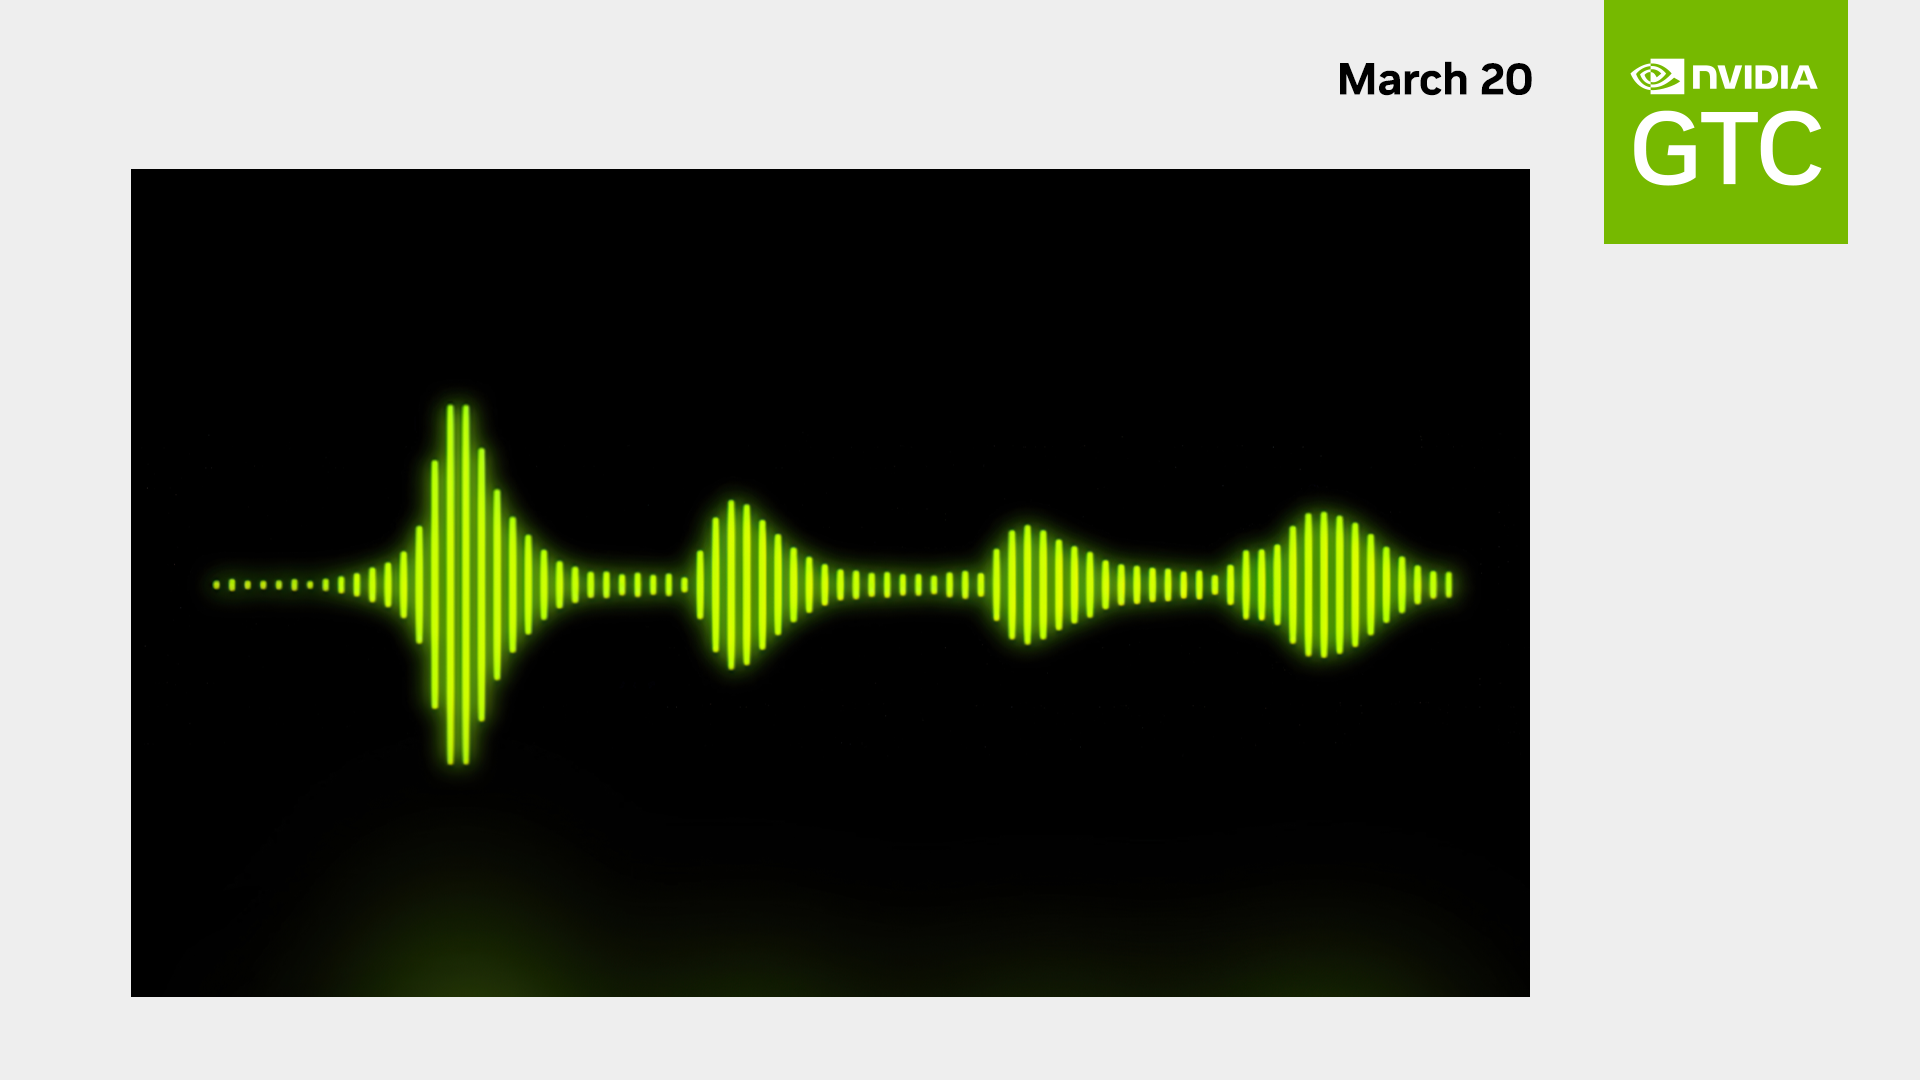 Black background with bright green sound waves and GTC banner in the corner.